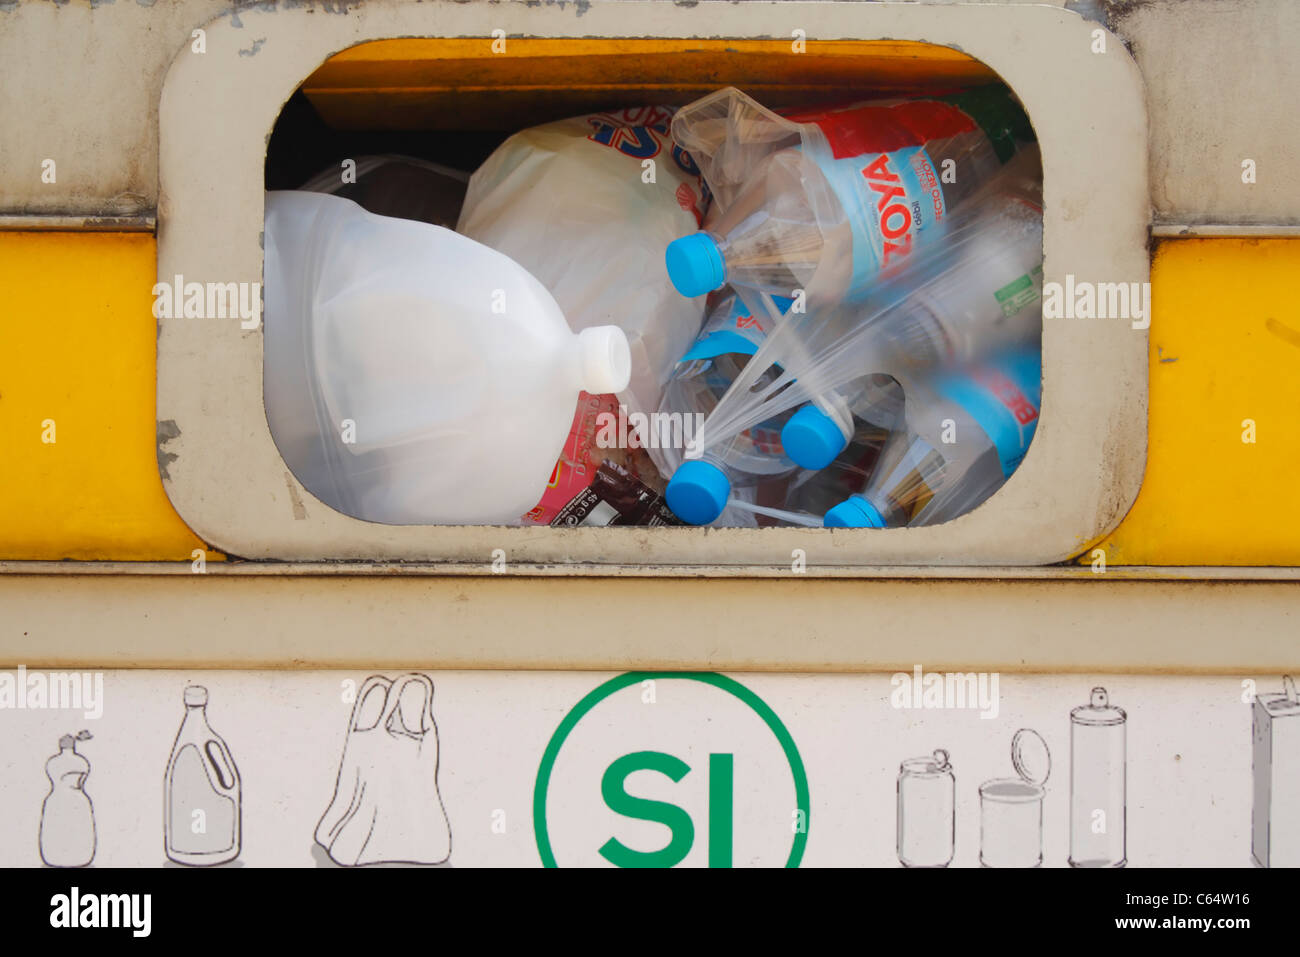 Recycling container for plastic items in street in Spain Stock Photo